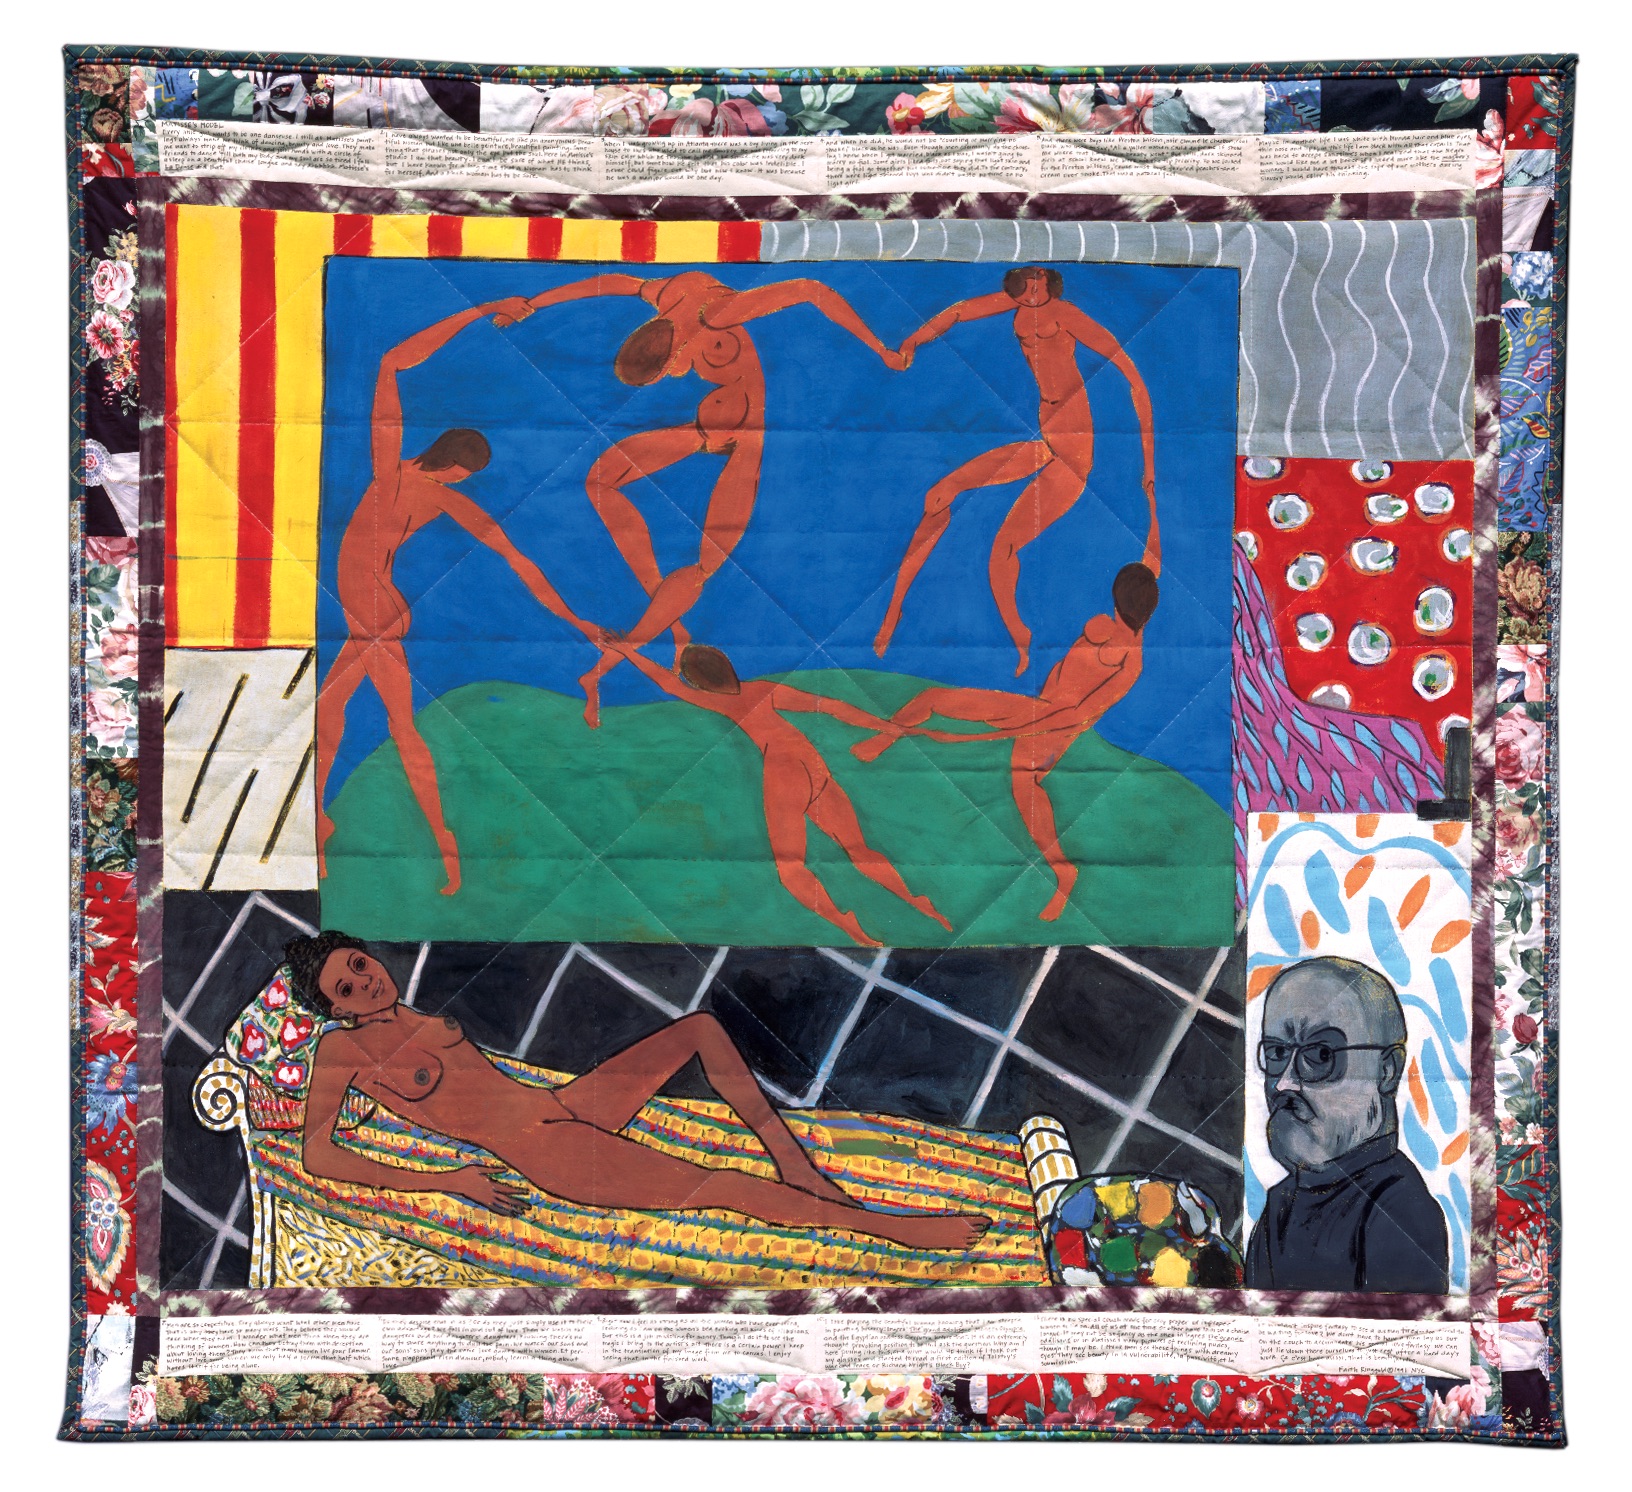 The Art World Ignored Faith Ringgold for Decades. Her Admirers